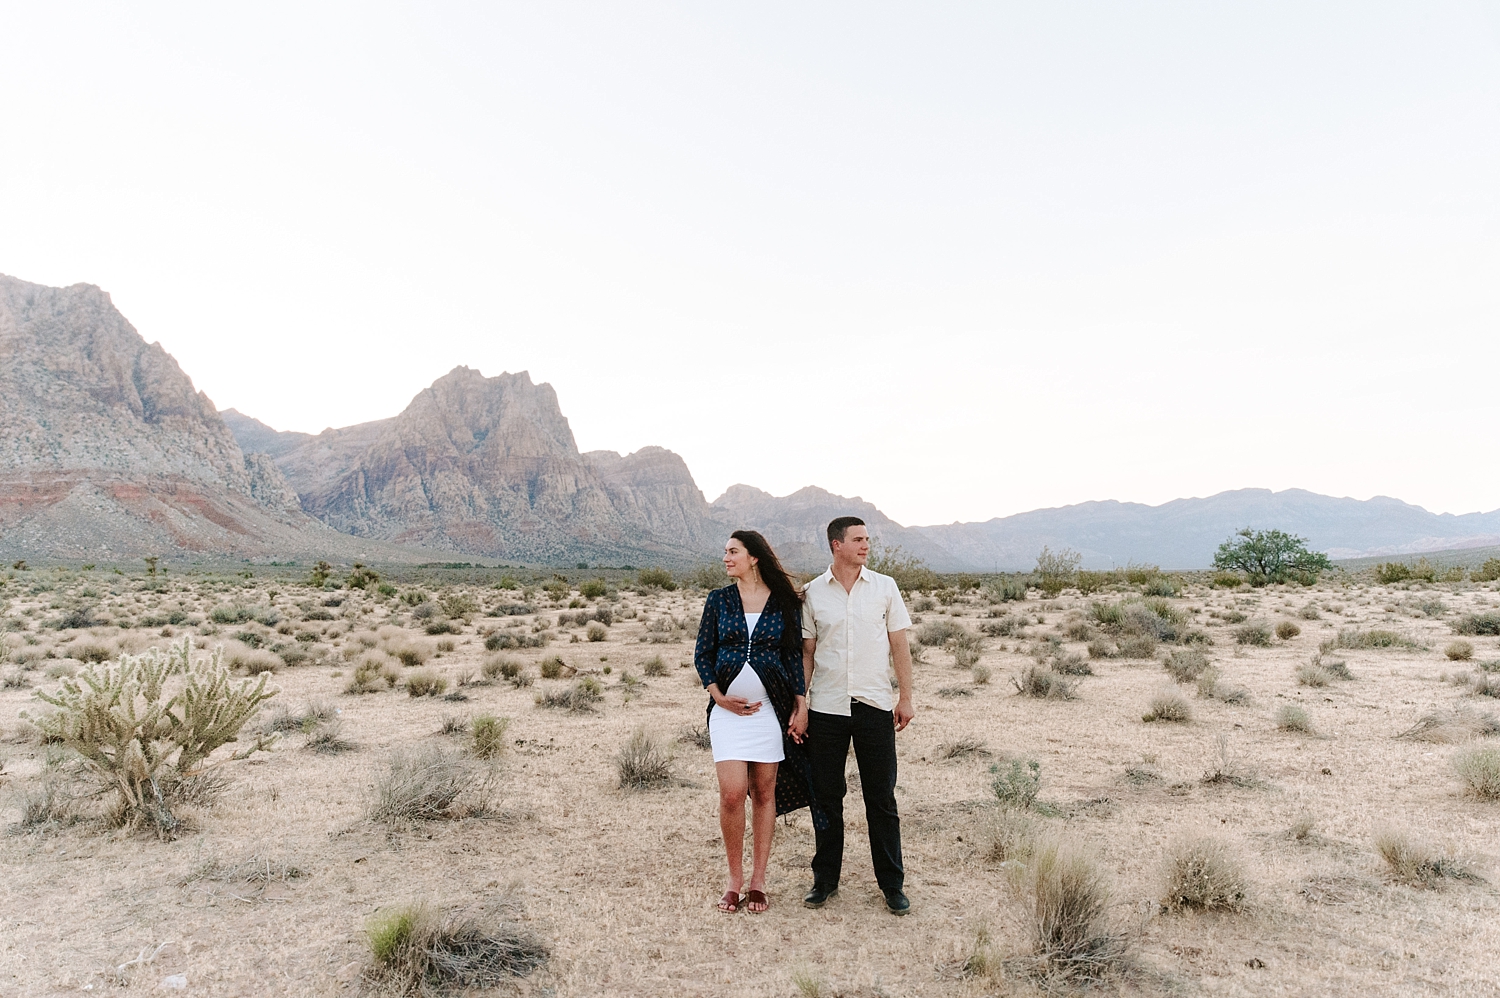 Couple maternity photoshoot in the Las Vegas Red Rocks. Photographed by Meg Newton Photography